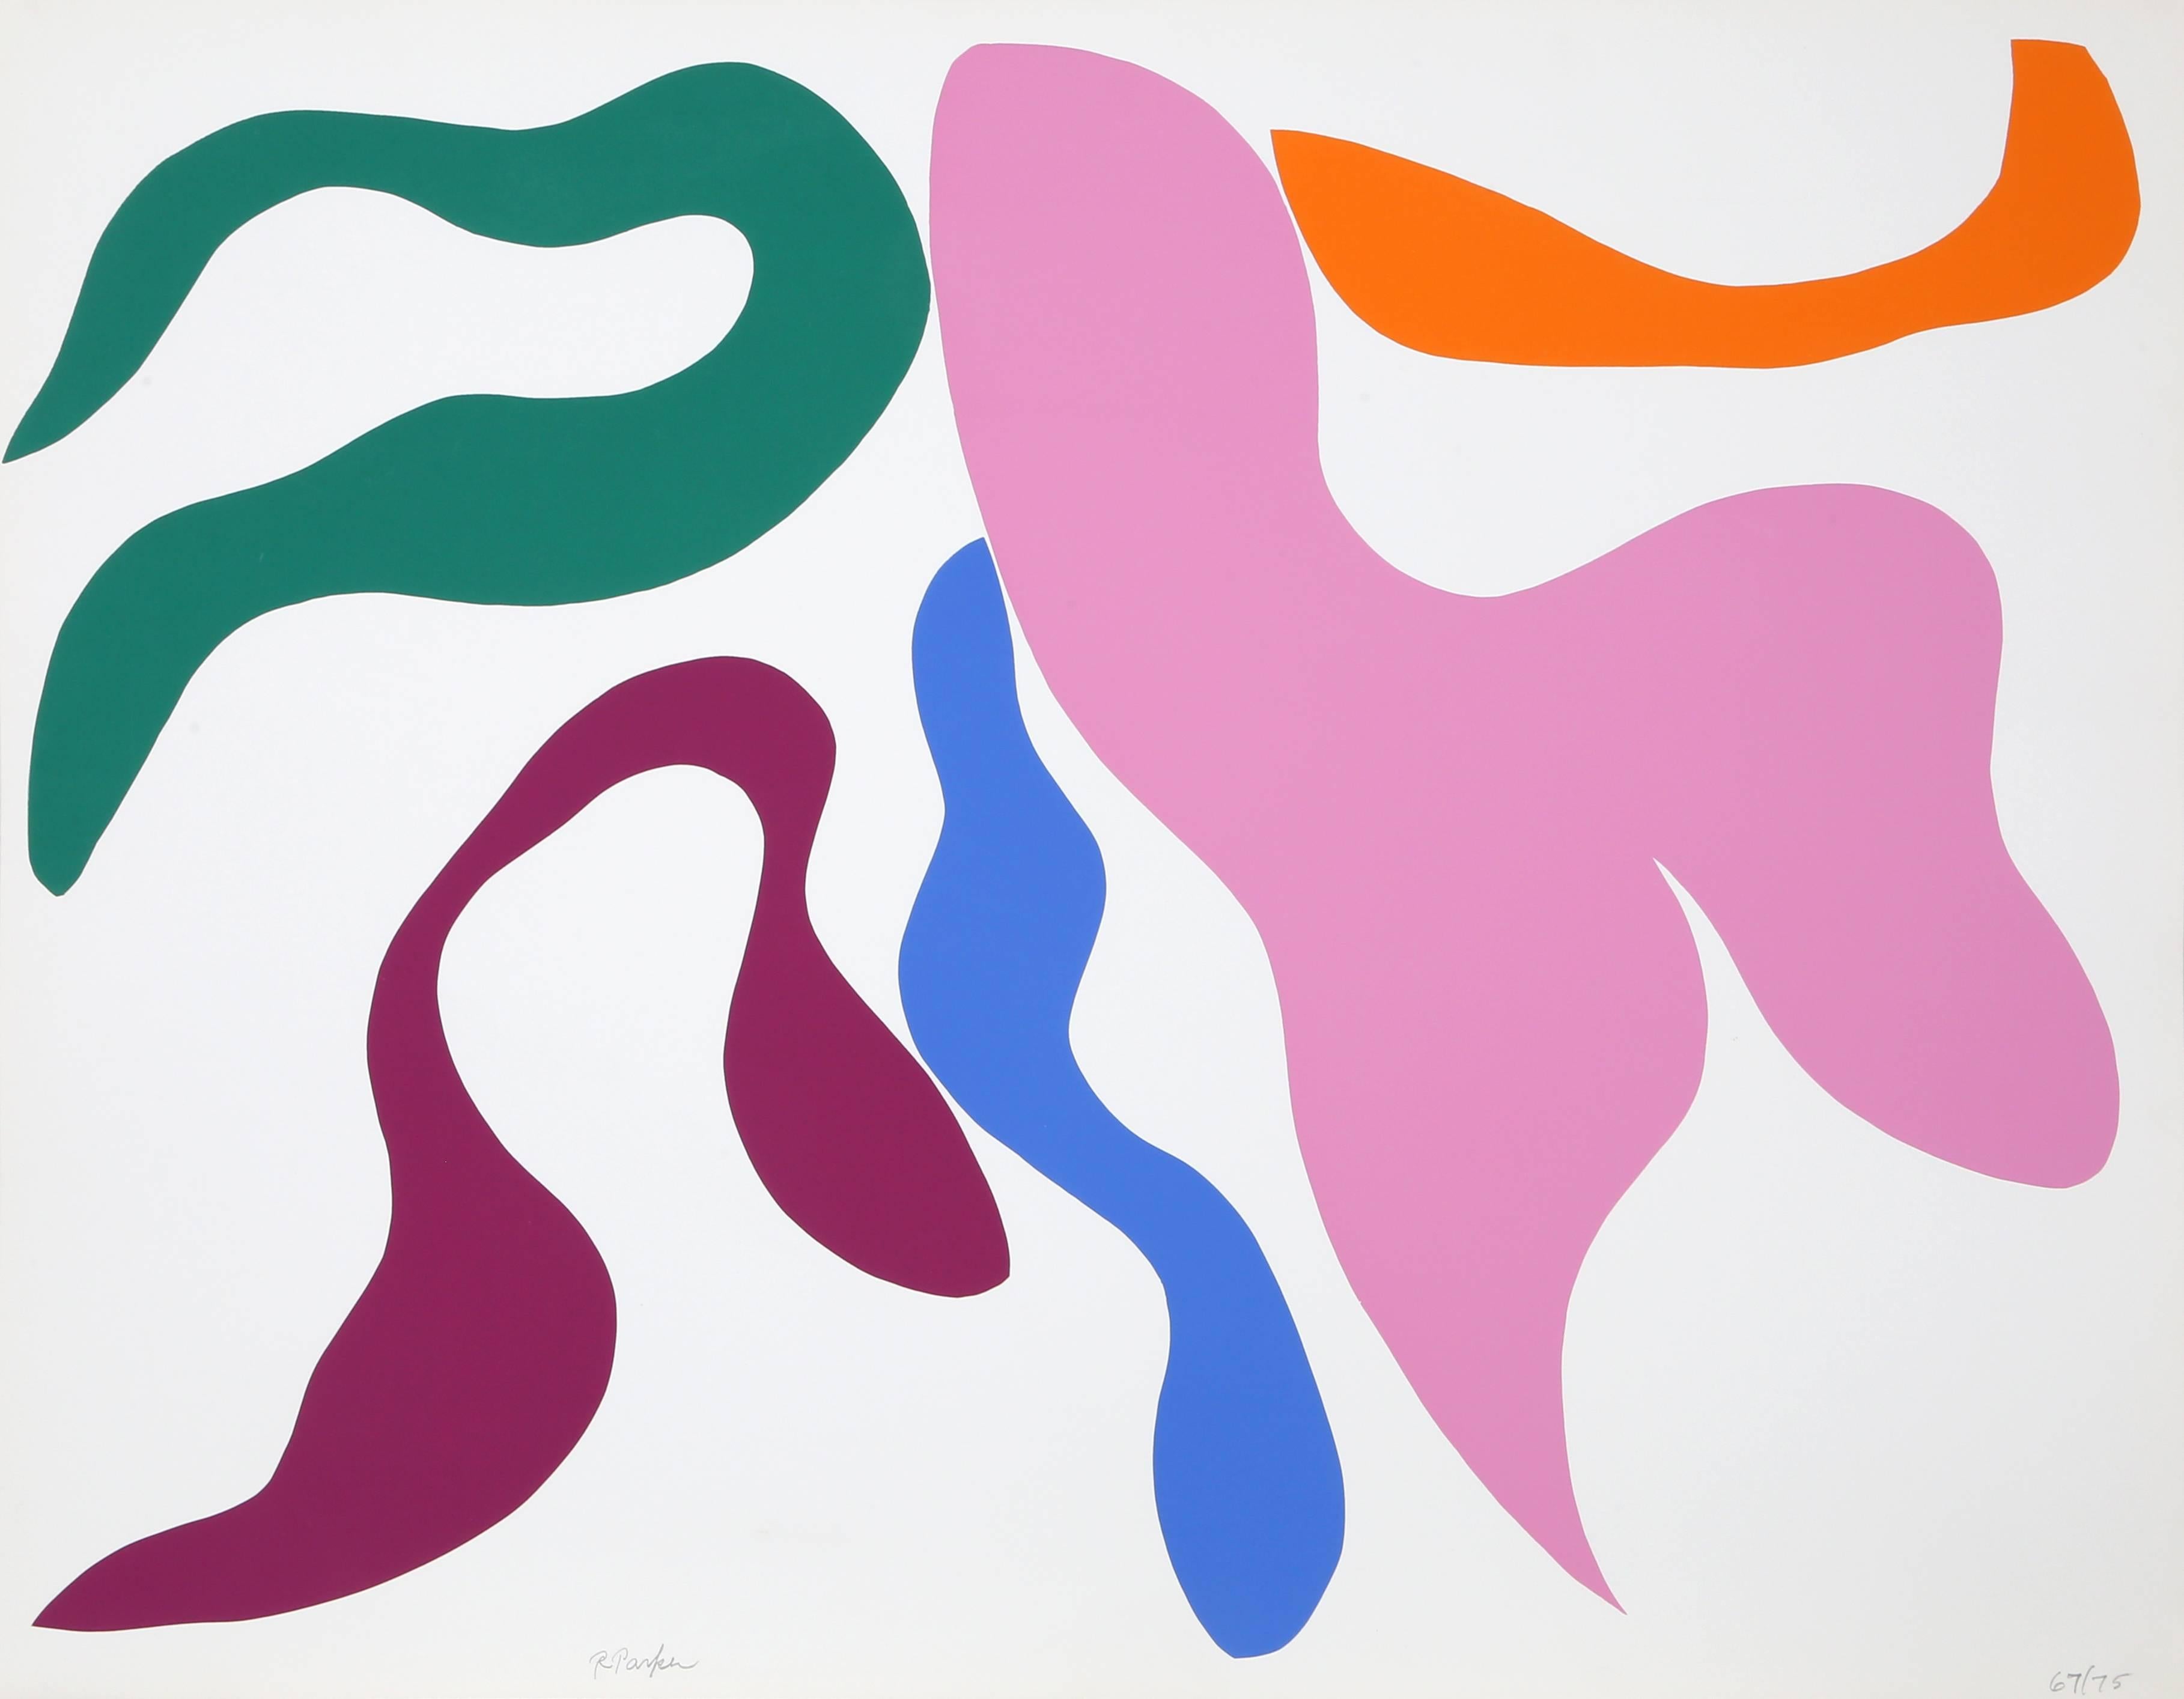 Artist: Raymond Parker, American (1922 - 1990)
Title: Untitled 17
Year: 1980
Medium: Silkscreen, signed and numbered in pencil
Edition: 75
Size: 35 x 45 inches